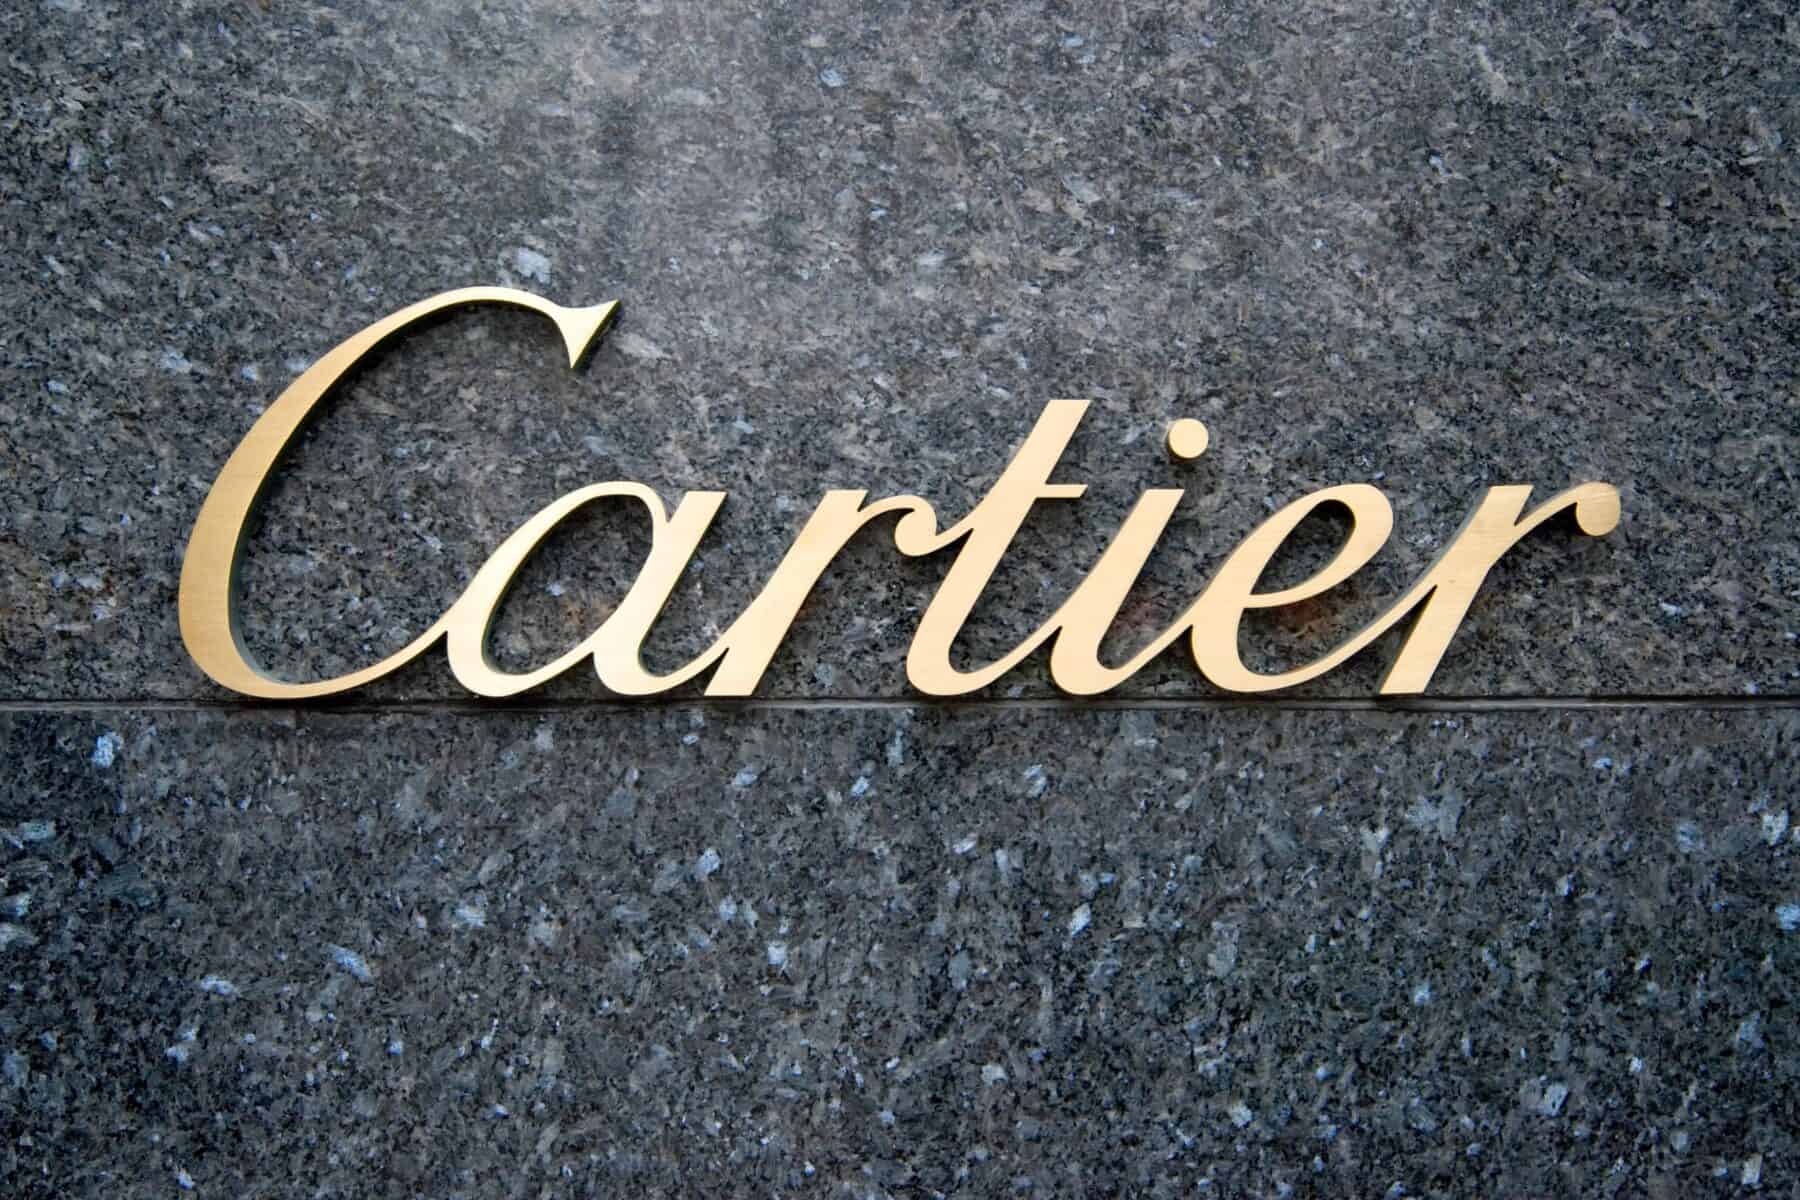 Legendary Cartier Store Remodel with Metal and Stone Details by Commercial Builder & General Contractor Structural Enterprises